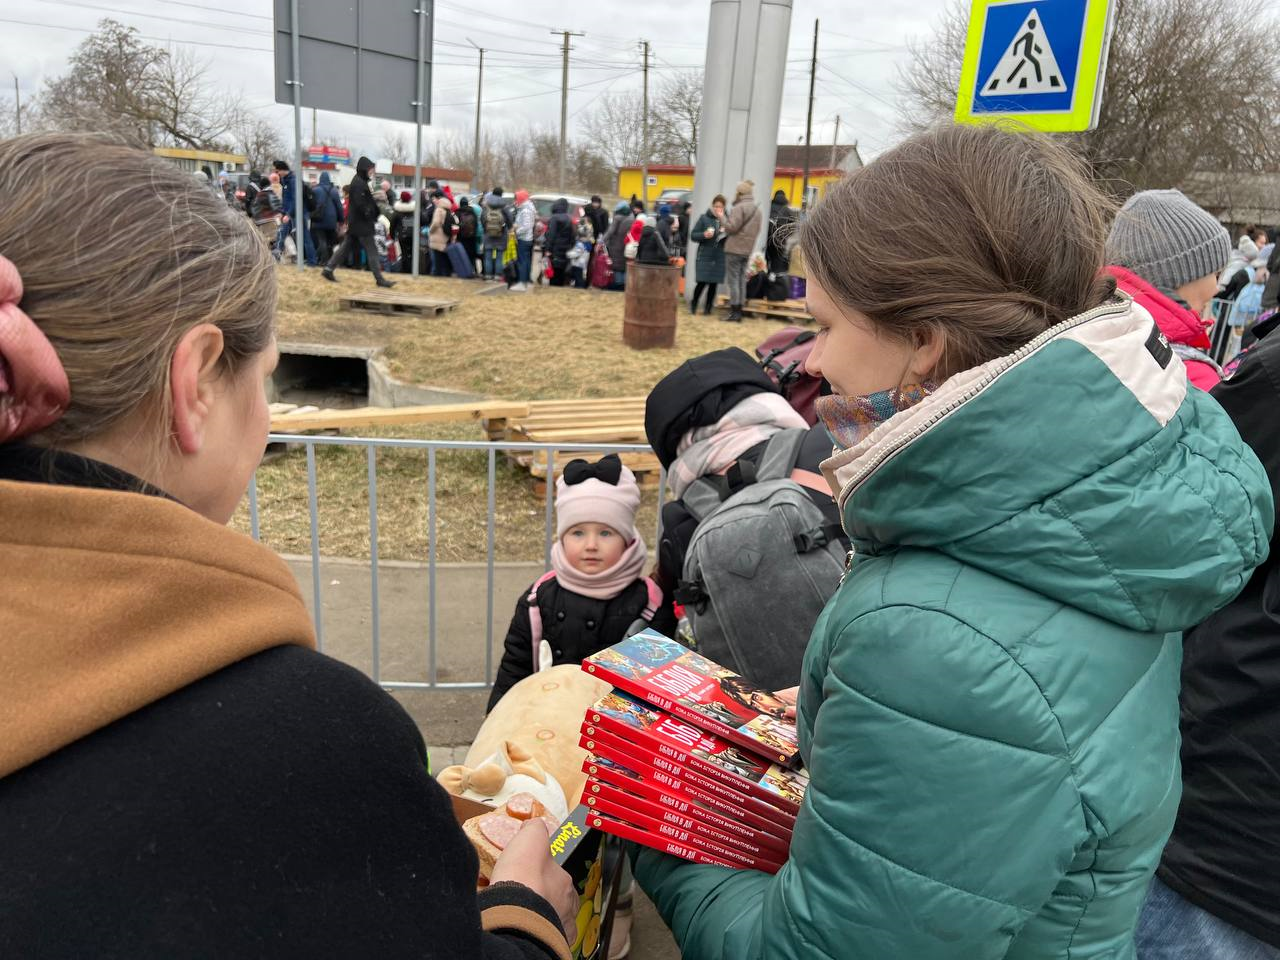 Displaced people in Western Ukraine stand in line waiting for Mission Eurasia’s “I-Care” boxes with food and spiritual resources.